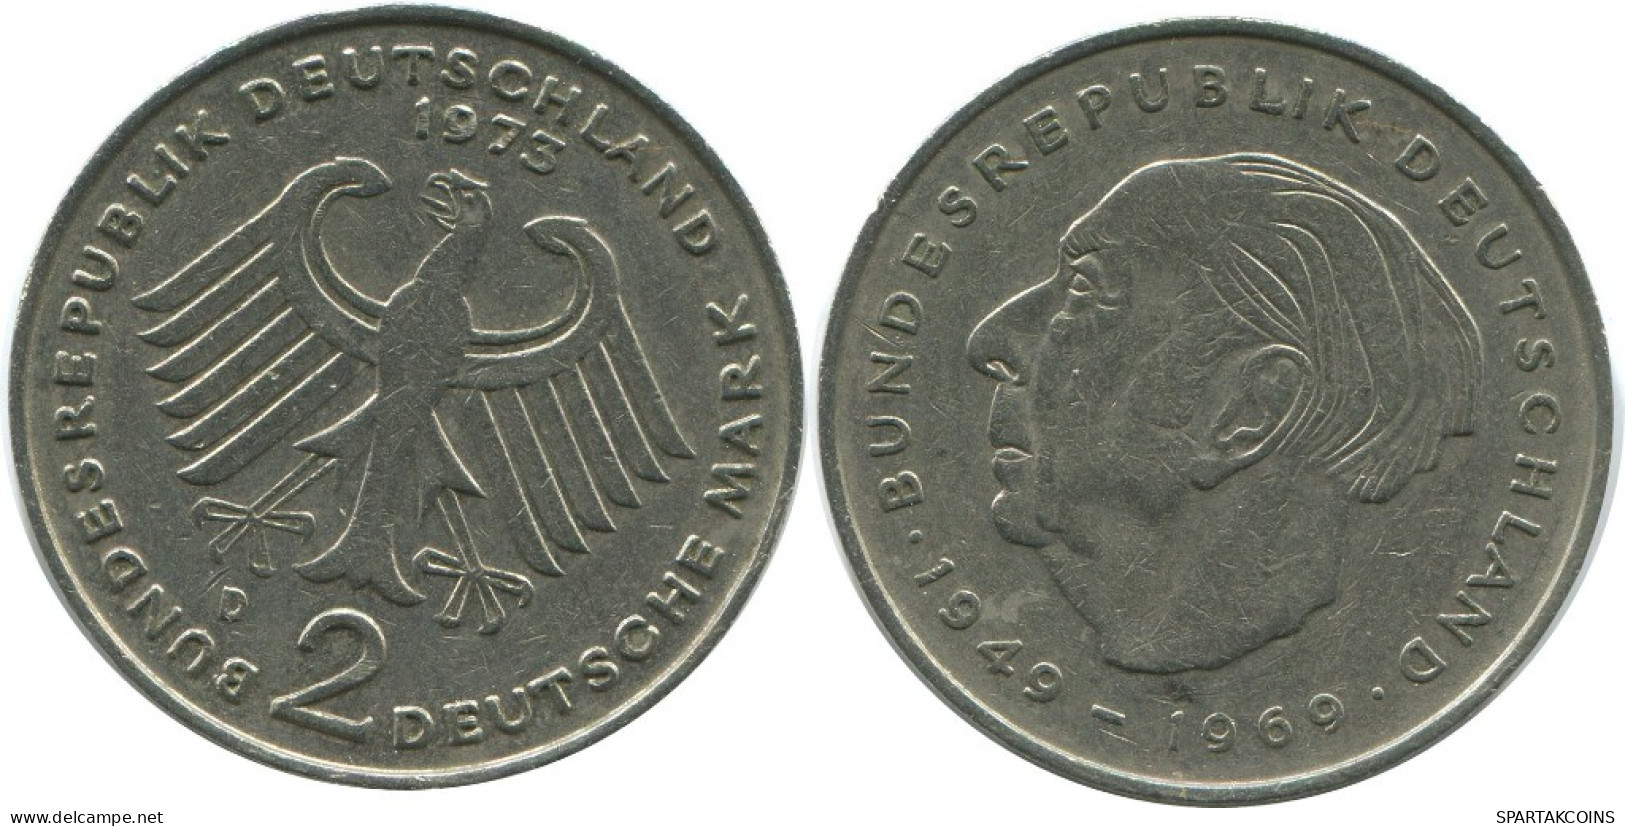 2 DM 1973 D T.HEUSS WEST & UNIFIED GERMANY Coin #AG236.3.U.A - 2 Marchi